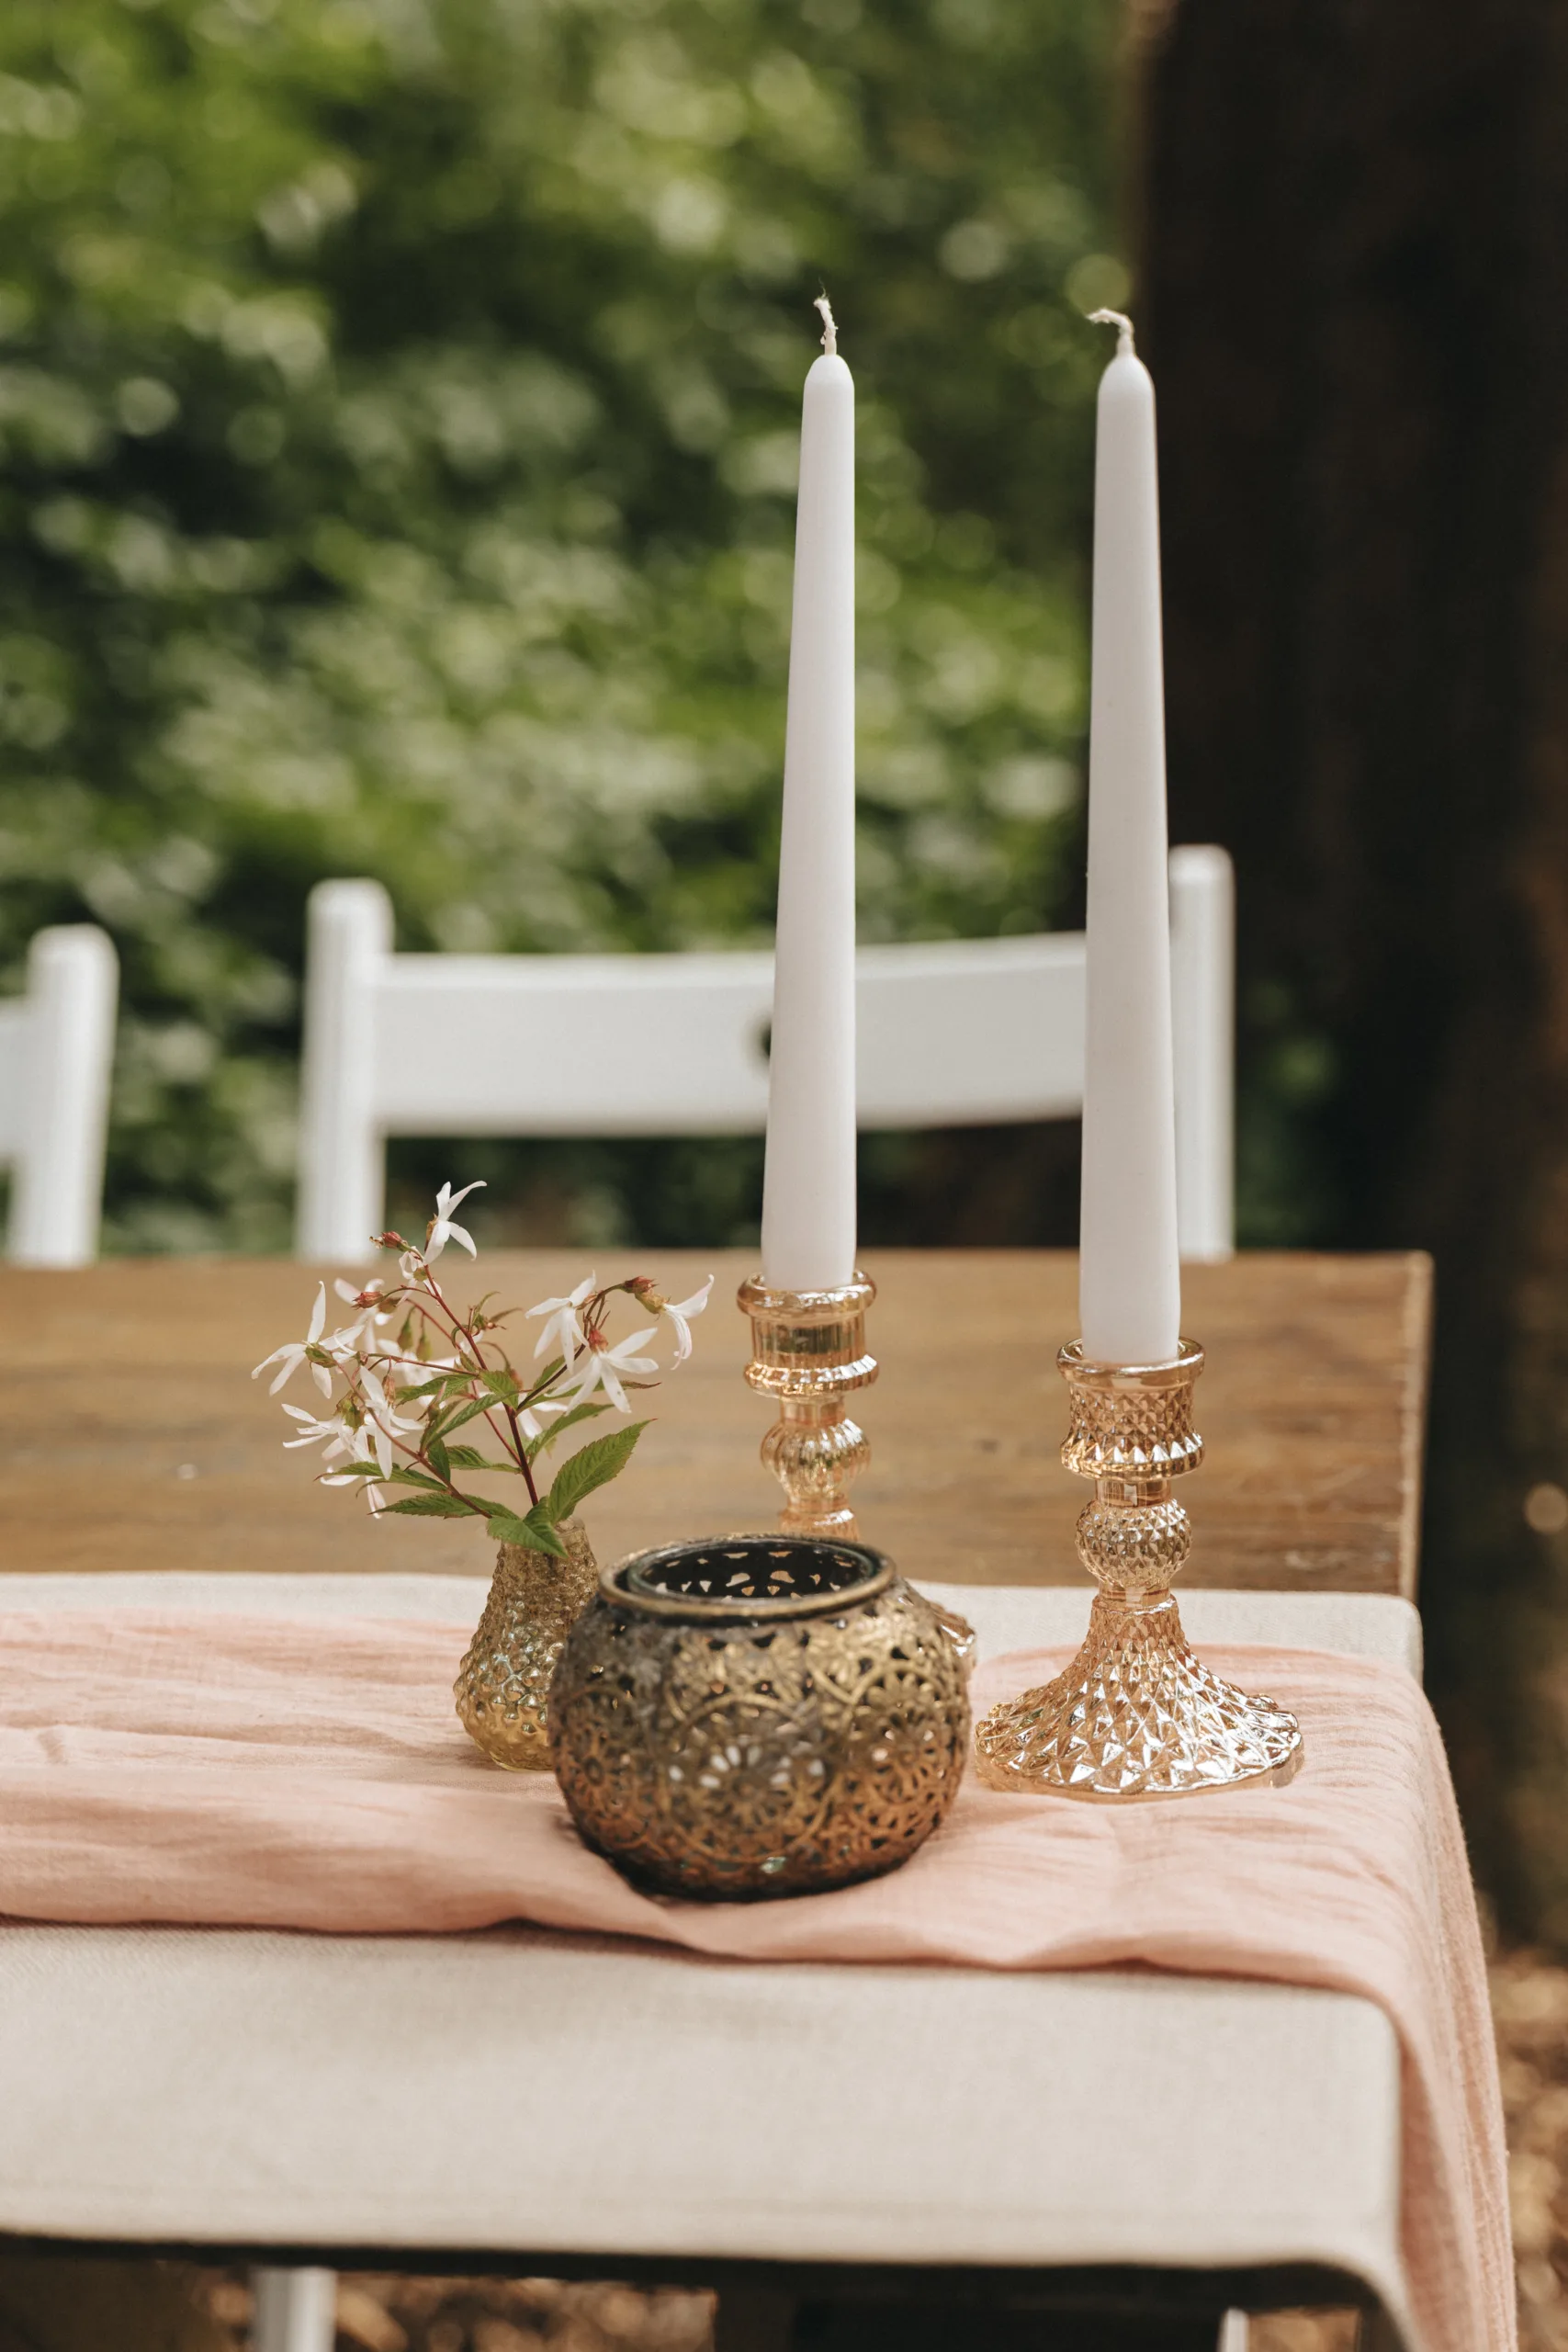 Two candles on a table in the woods, perfect for a photography shoot.